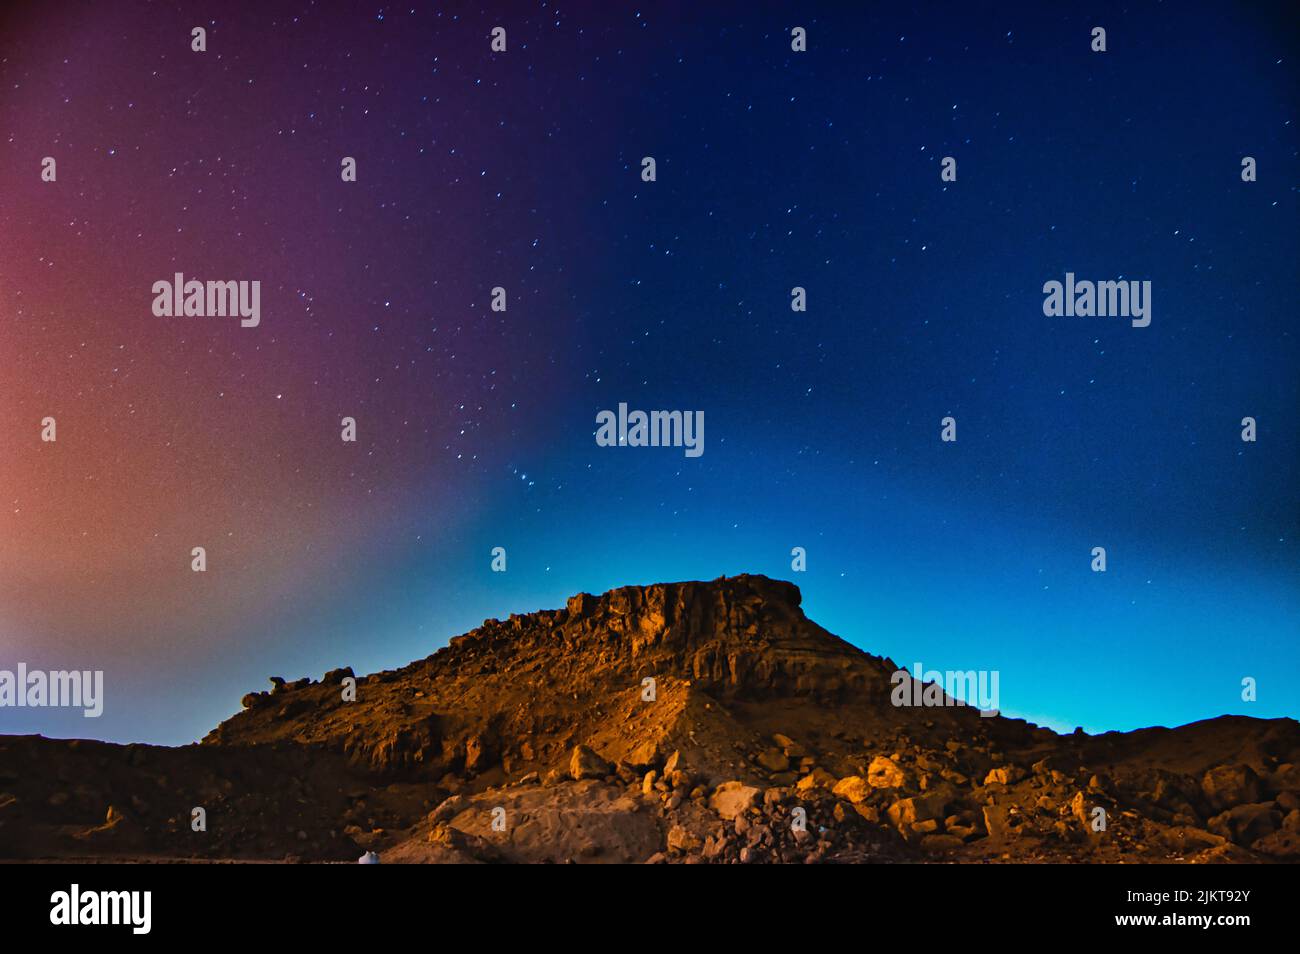 A mesmerizing scene of a Starry night Rocky hill realistic Very saturated Sky vista Stars Stock Photo